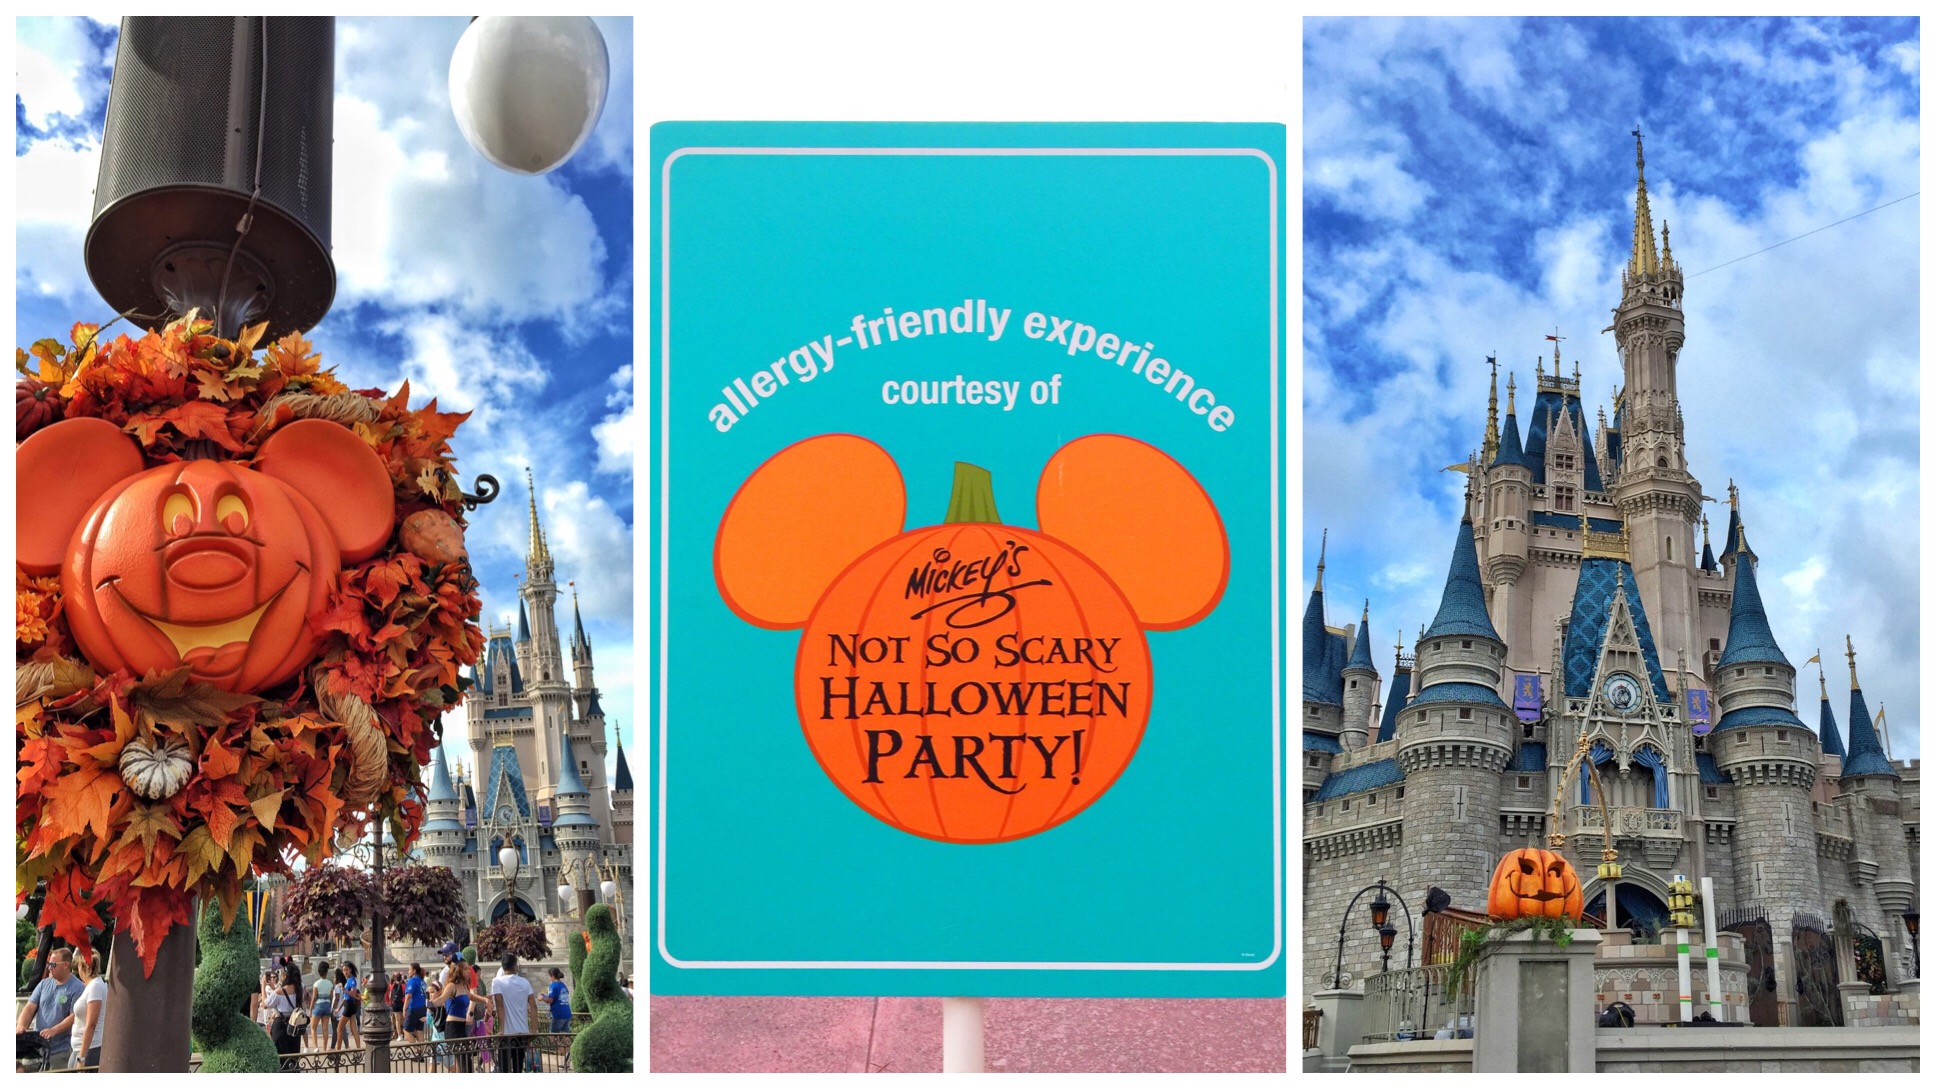 Vegan Guide to Mickey's Not So Scary Halloween Party in the Magic Kingdom at Walt Disney World